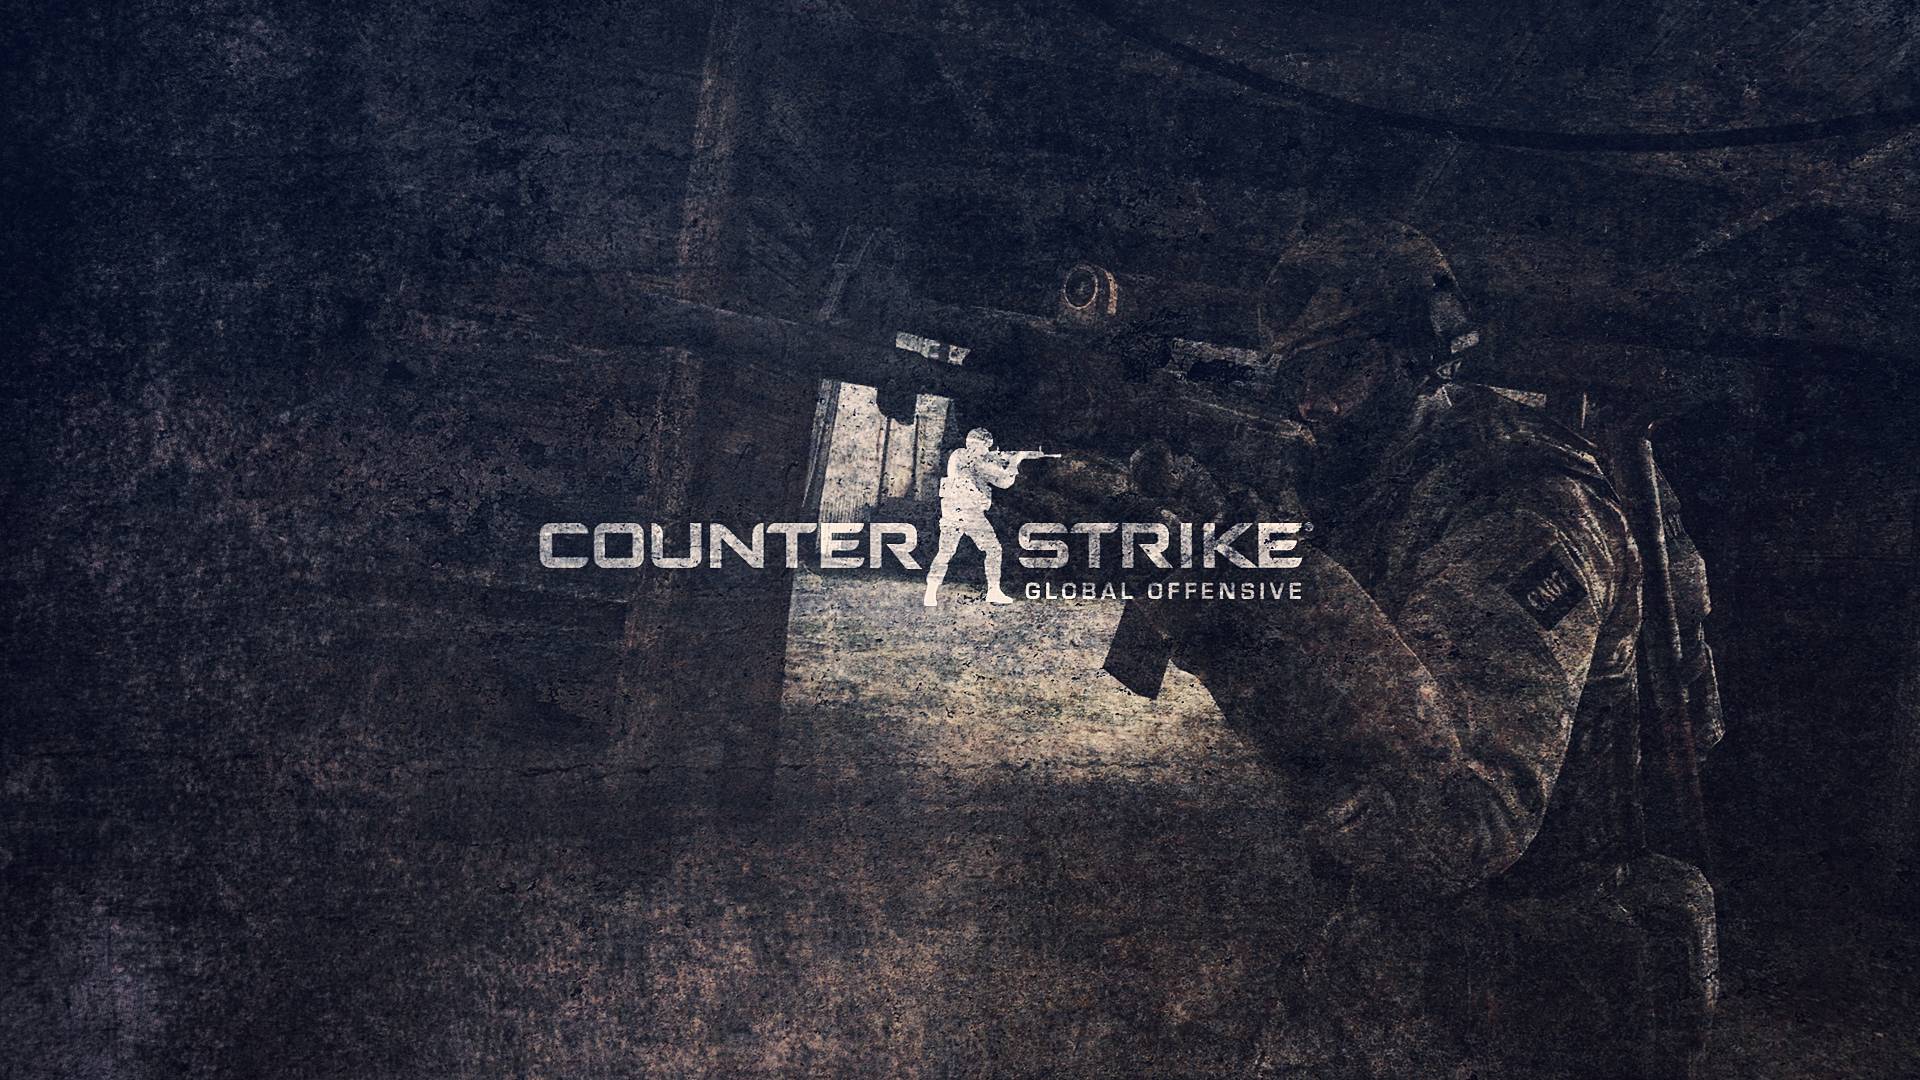 video game, counter strike: global offensive, counter strike High Definition image